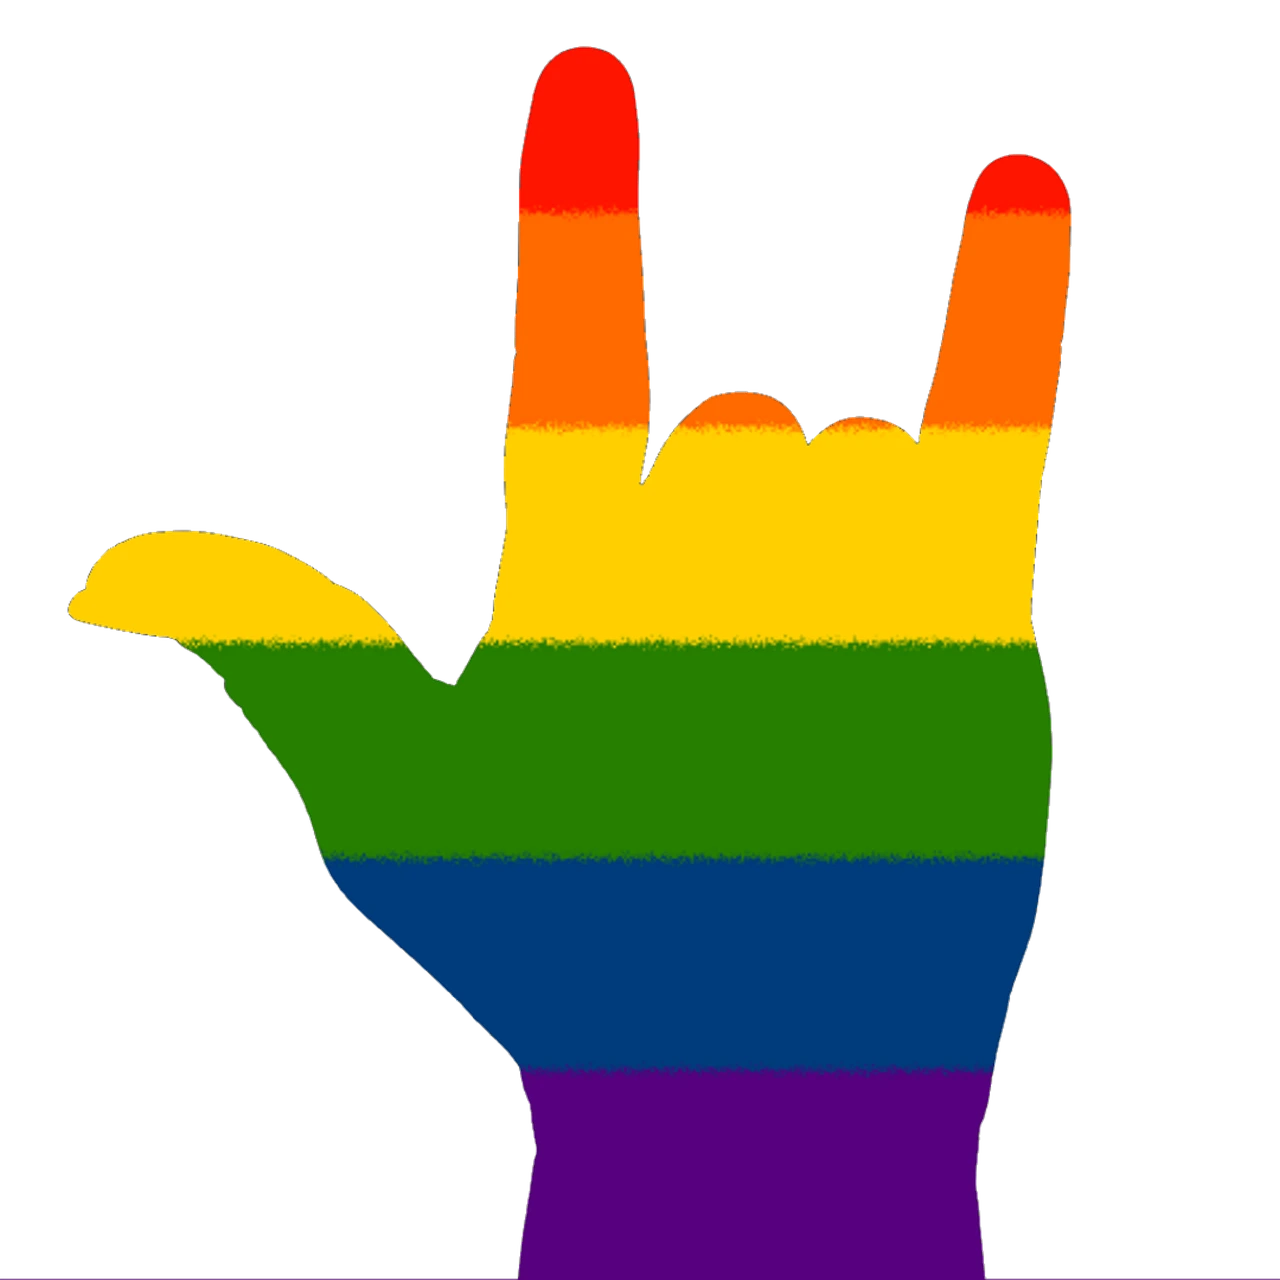 the love hand sign in LGBT pride flag rainbow colors